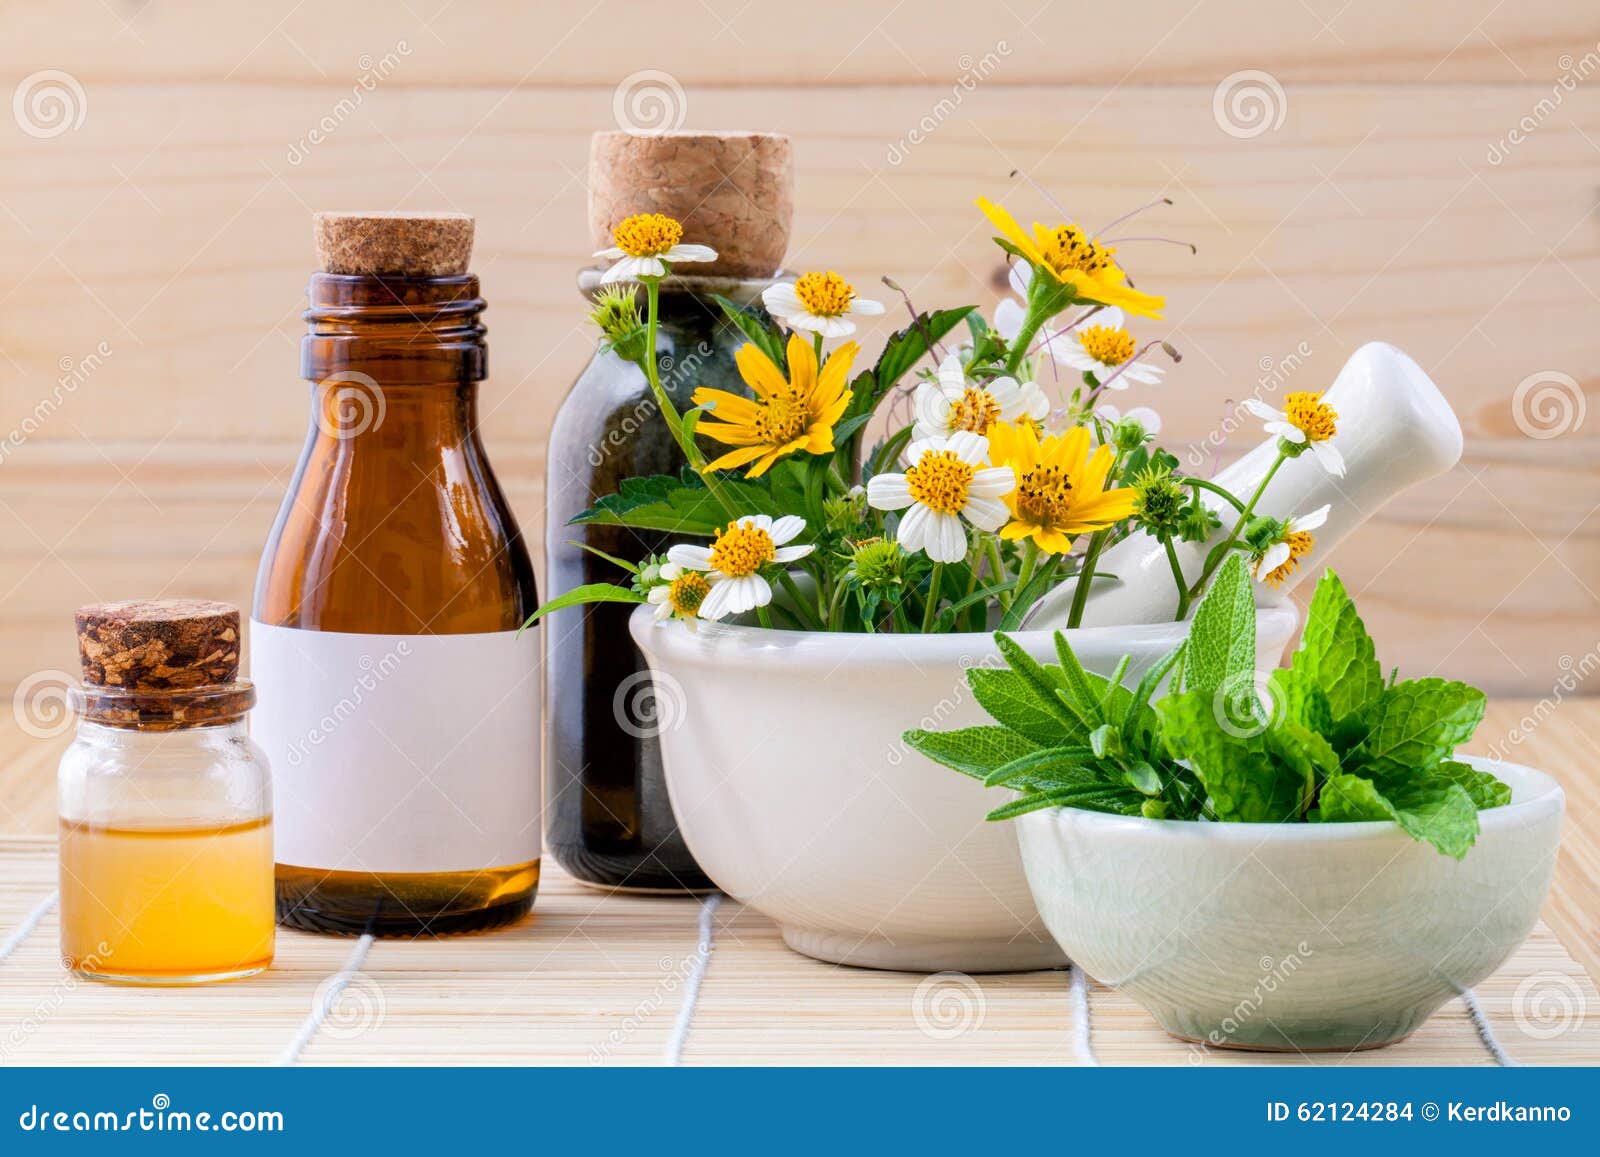 alternative health care fresh herbal ,honey and wild flower with